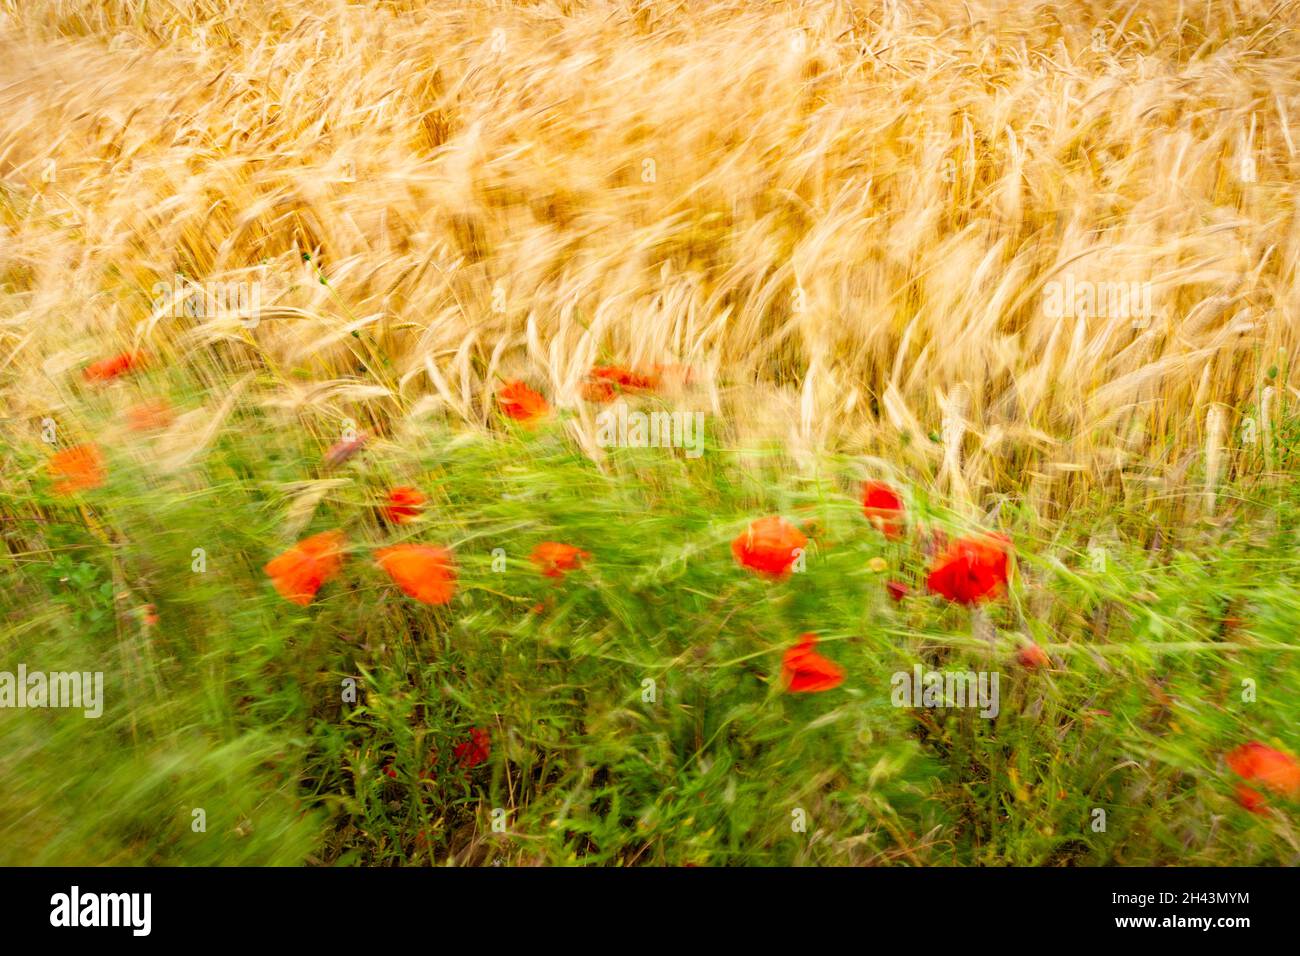 Red poppies and corn swaying in the breeze Stock Photo